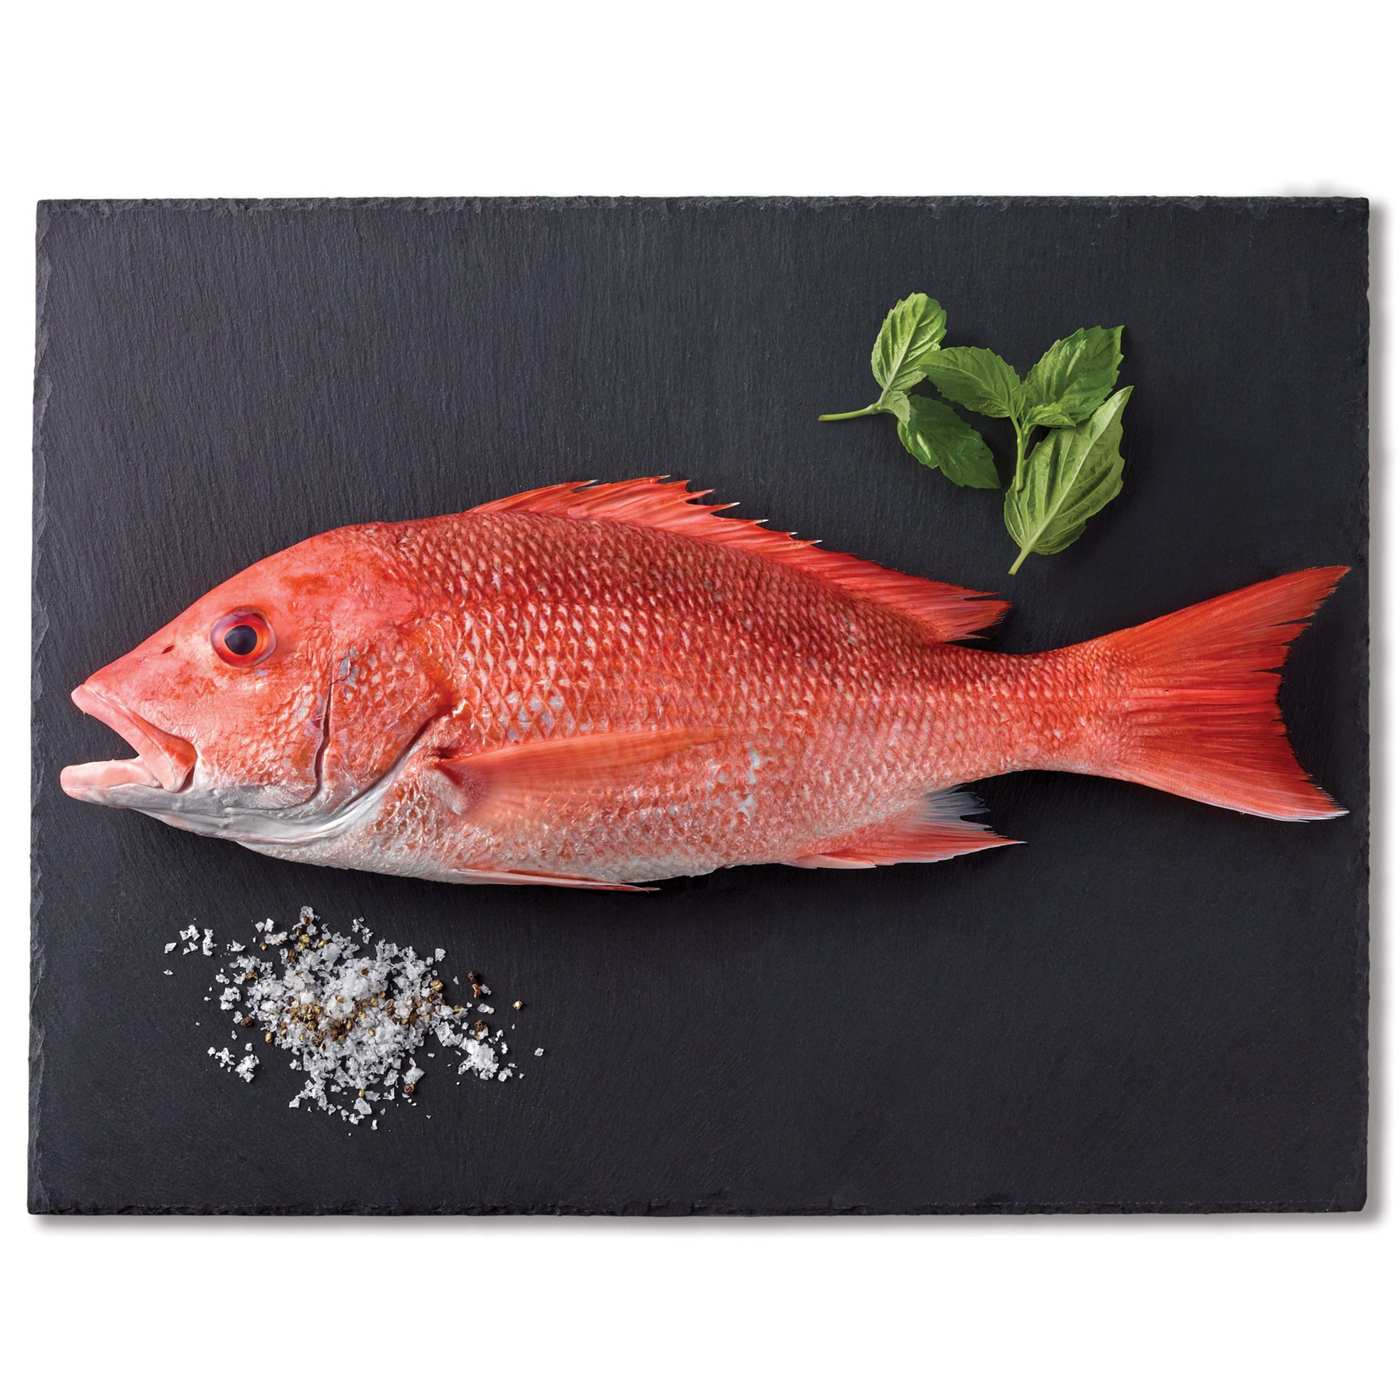 H-E-B Wild Caught Fresh Whole American Red Snapper; image 1 of 2